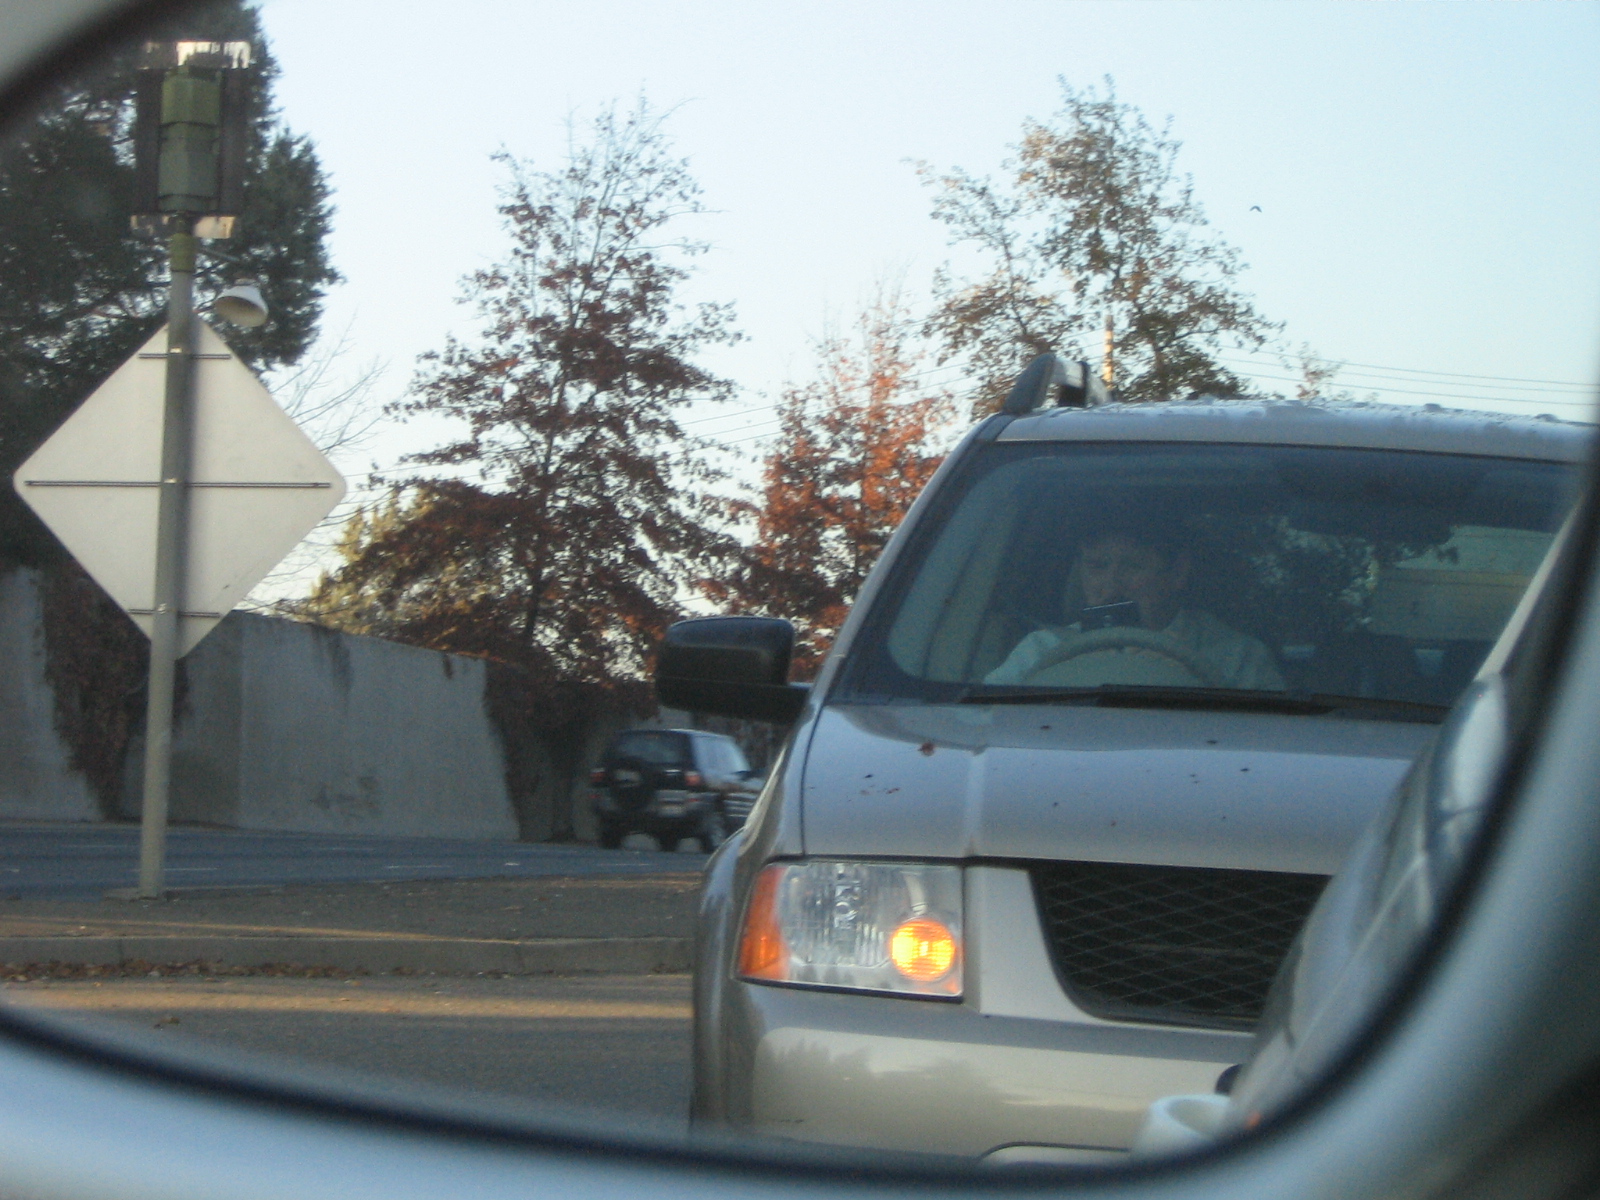 the reflection of a person behind a car's rear view mirror